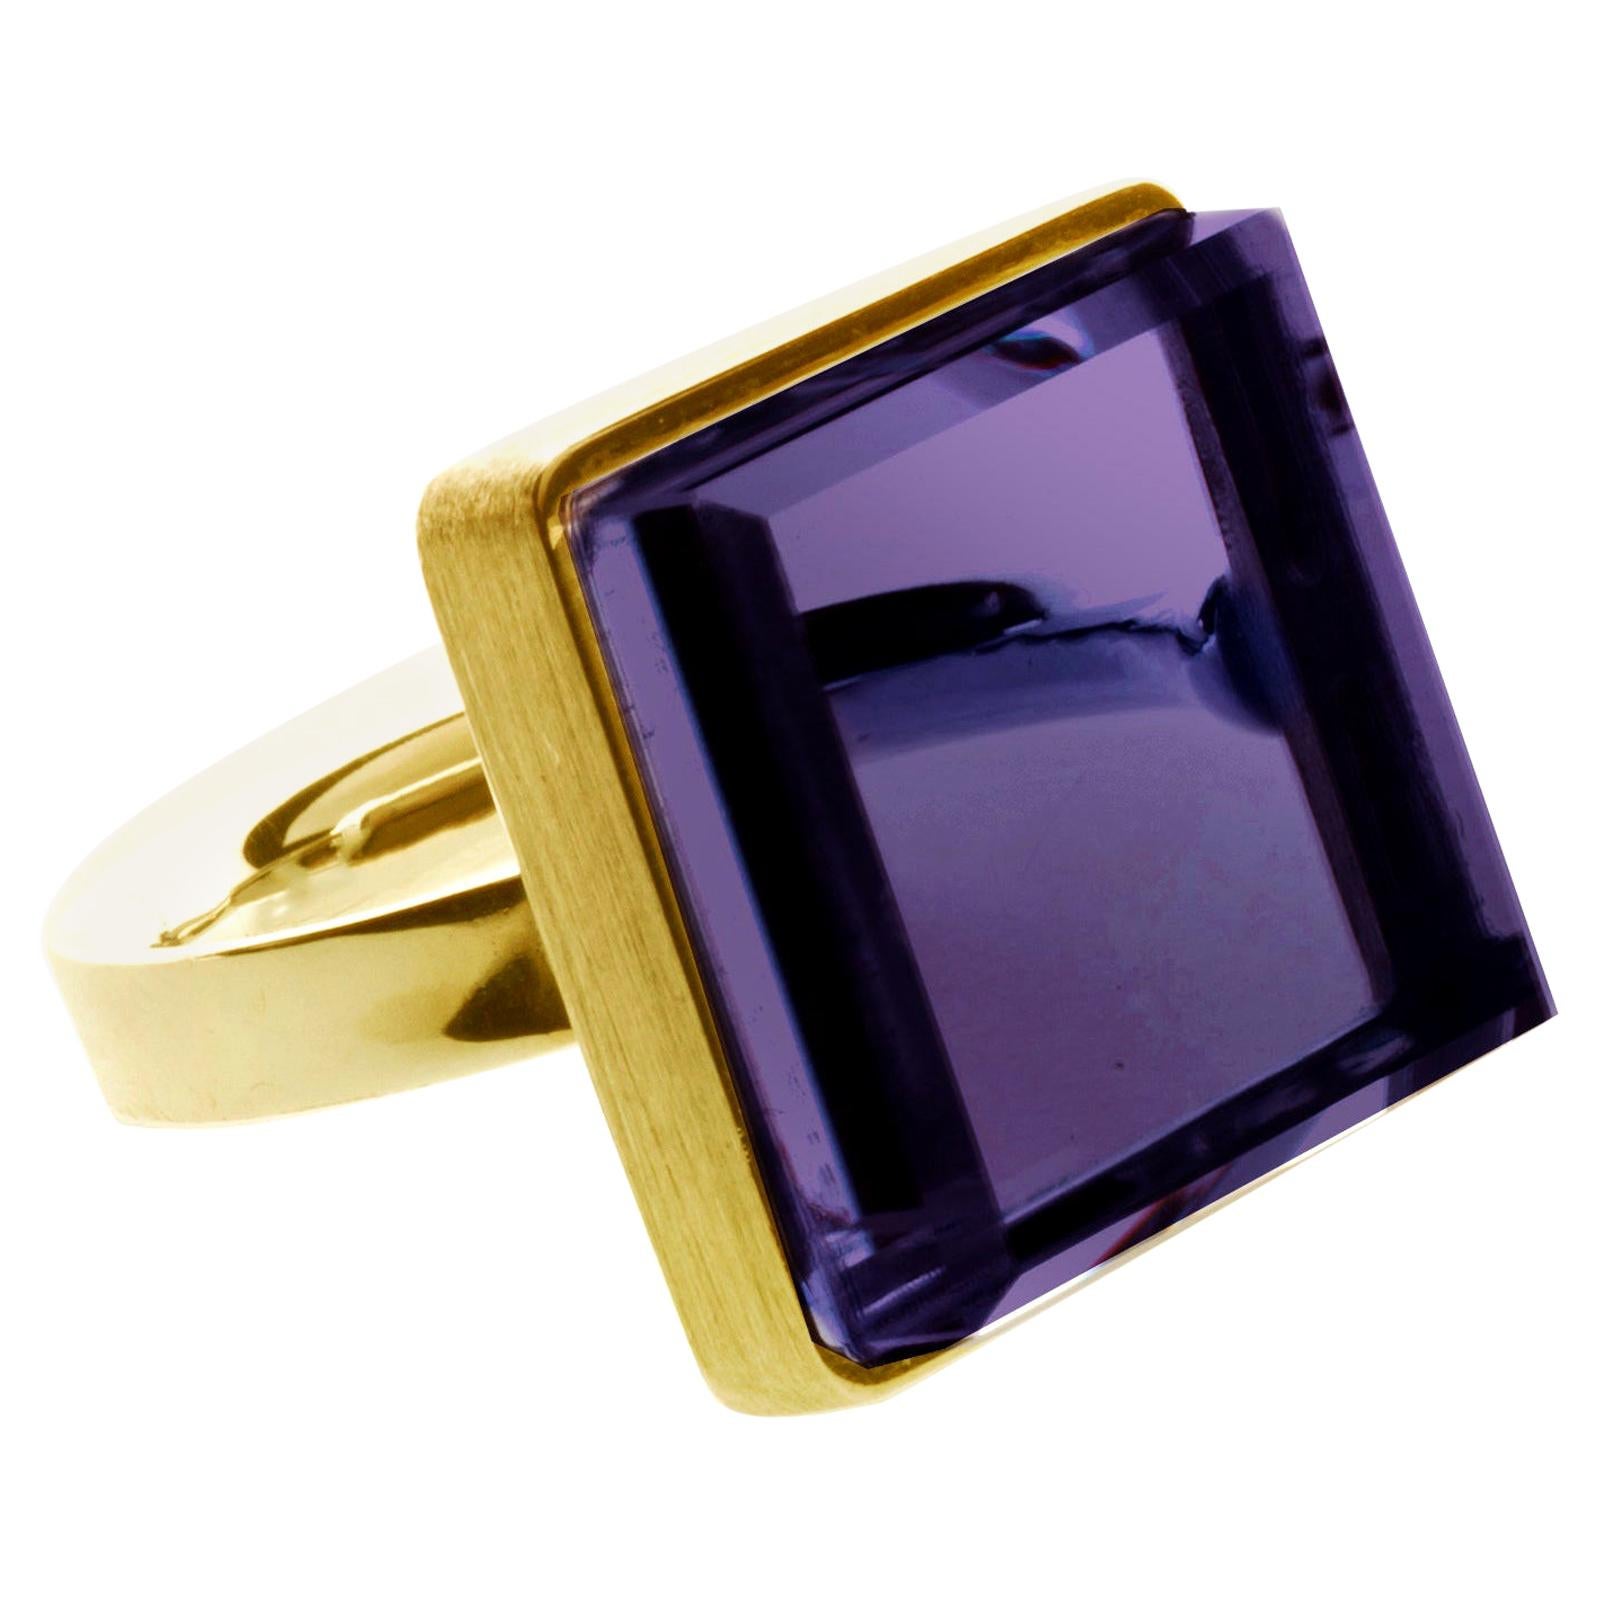 Featured in Vogue Yellow Gold-Plated Art Deco Style Ring with Dark Amethyst For Sale 6